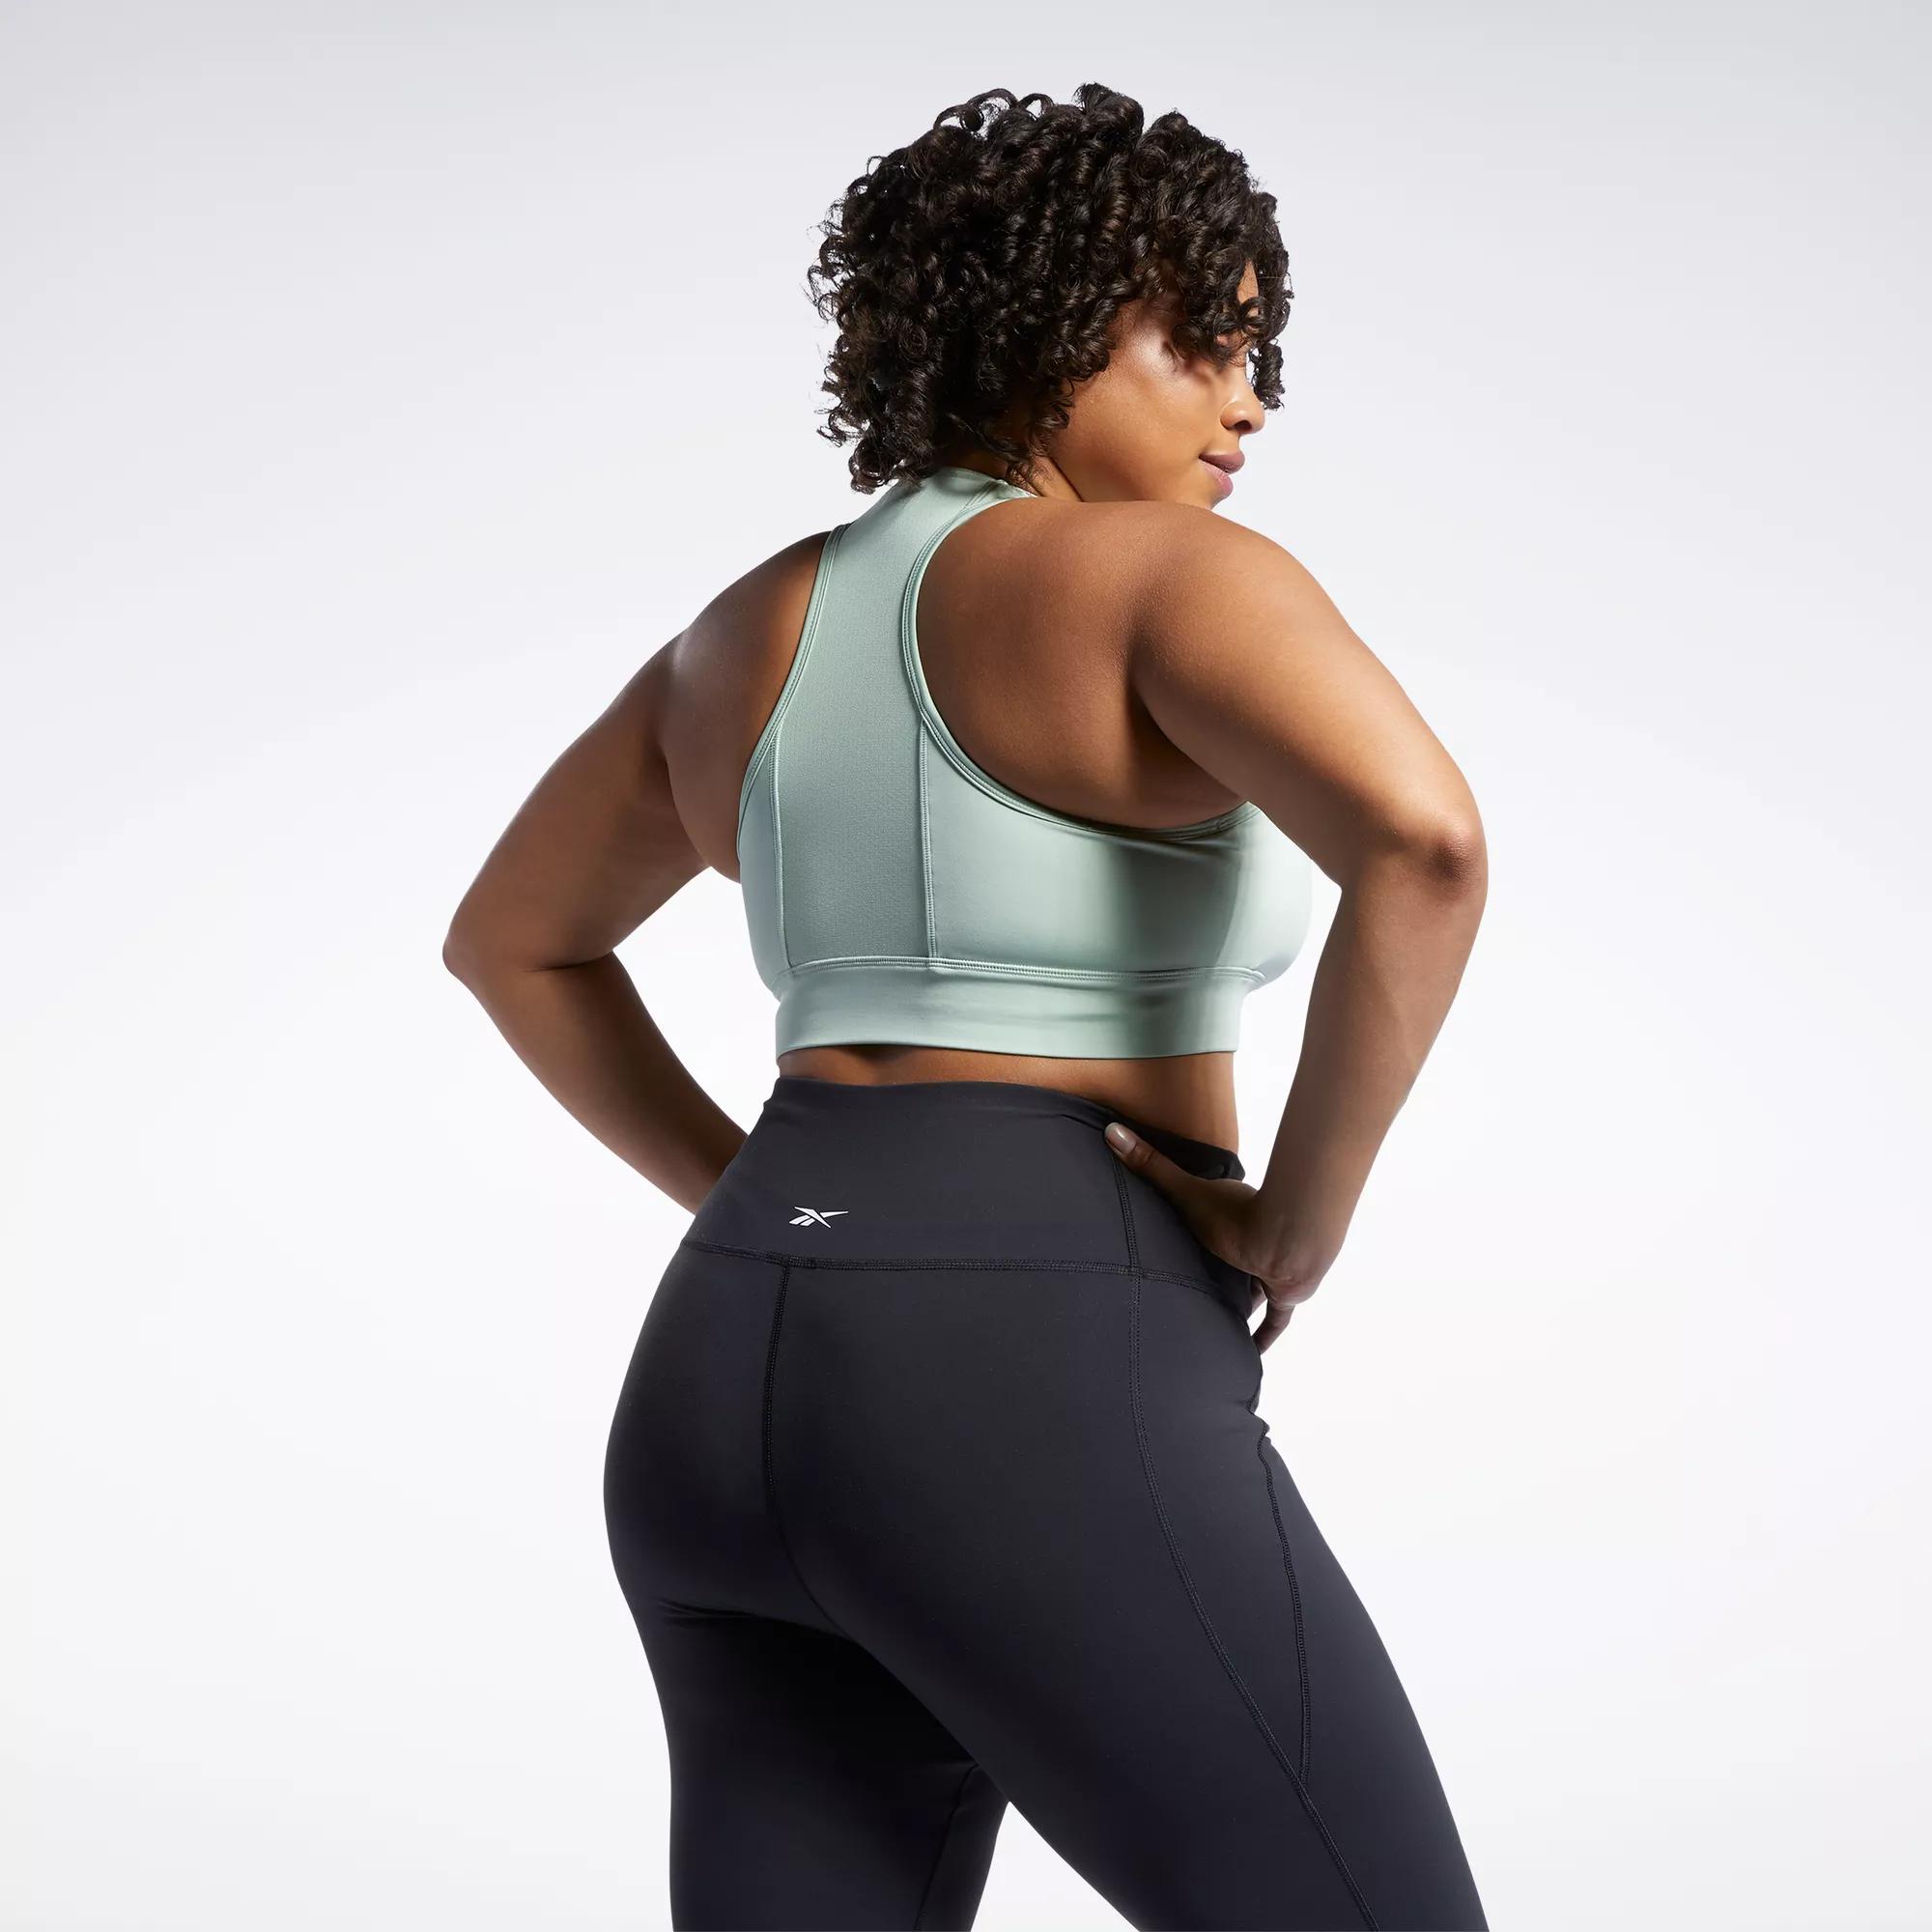 KDDYLITQ Plus Size Sports Bra High Impact Support Women's Sports Bras High  Impact Yoga Seamless Wireless Bras with Support and Lift Push Up Maternity